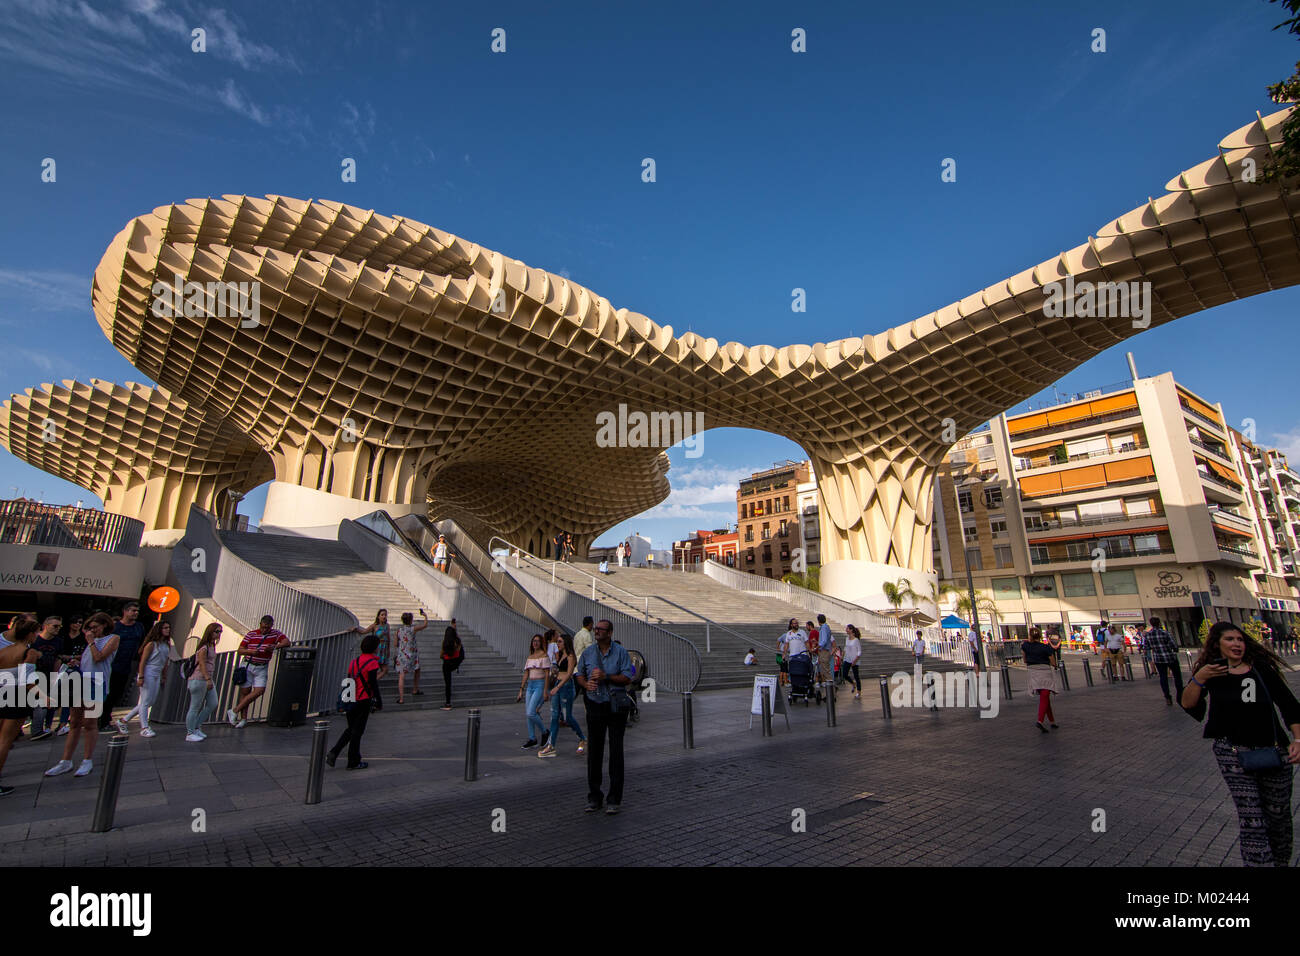 SEVILLE, ANDALUSIA / SPAIN - OCTOBER 13 2017: MODERN ARCHITECTURE AND BLUE SKY Stock Photo